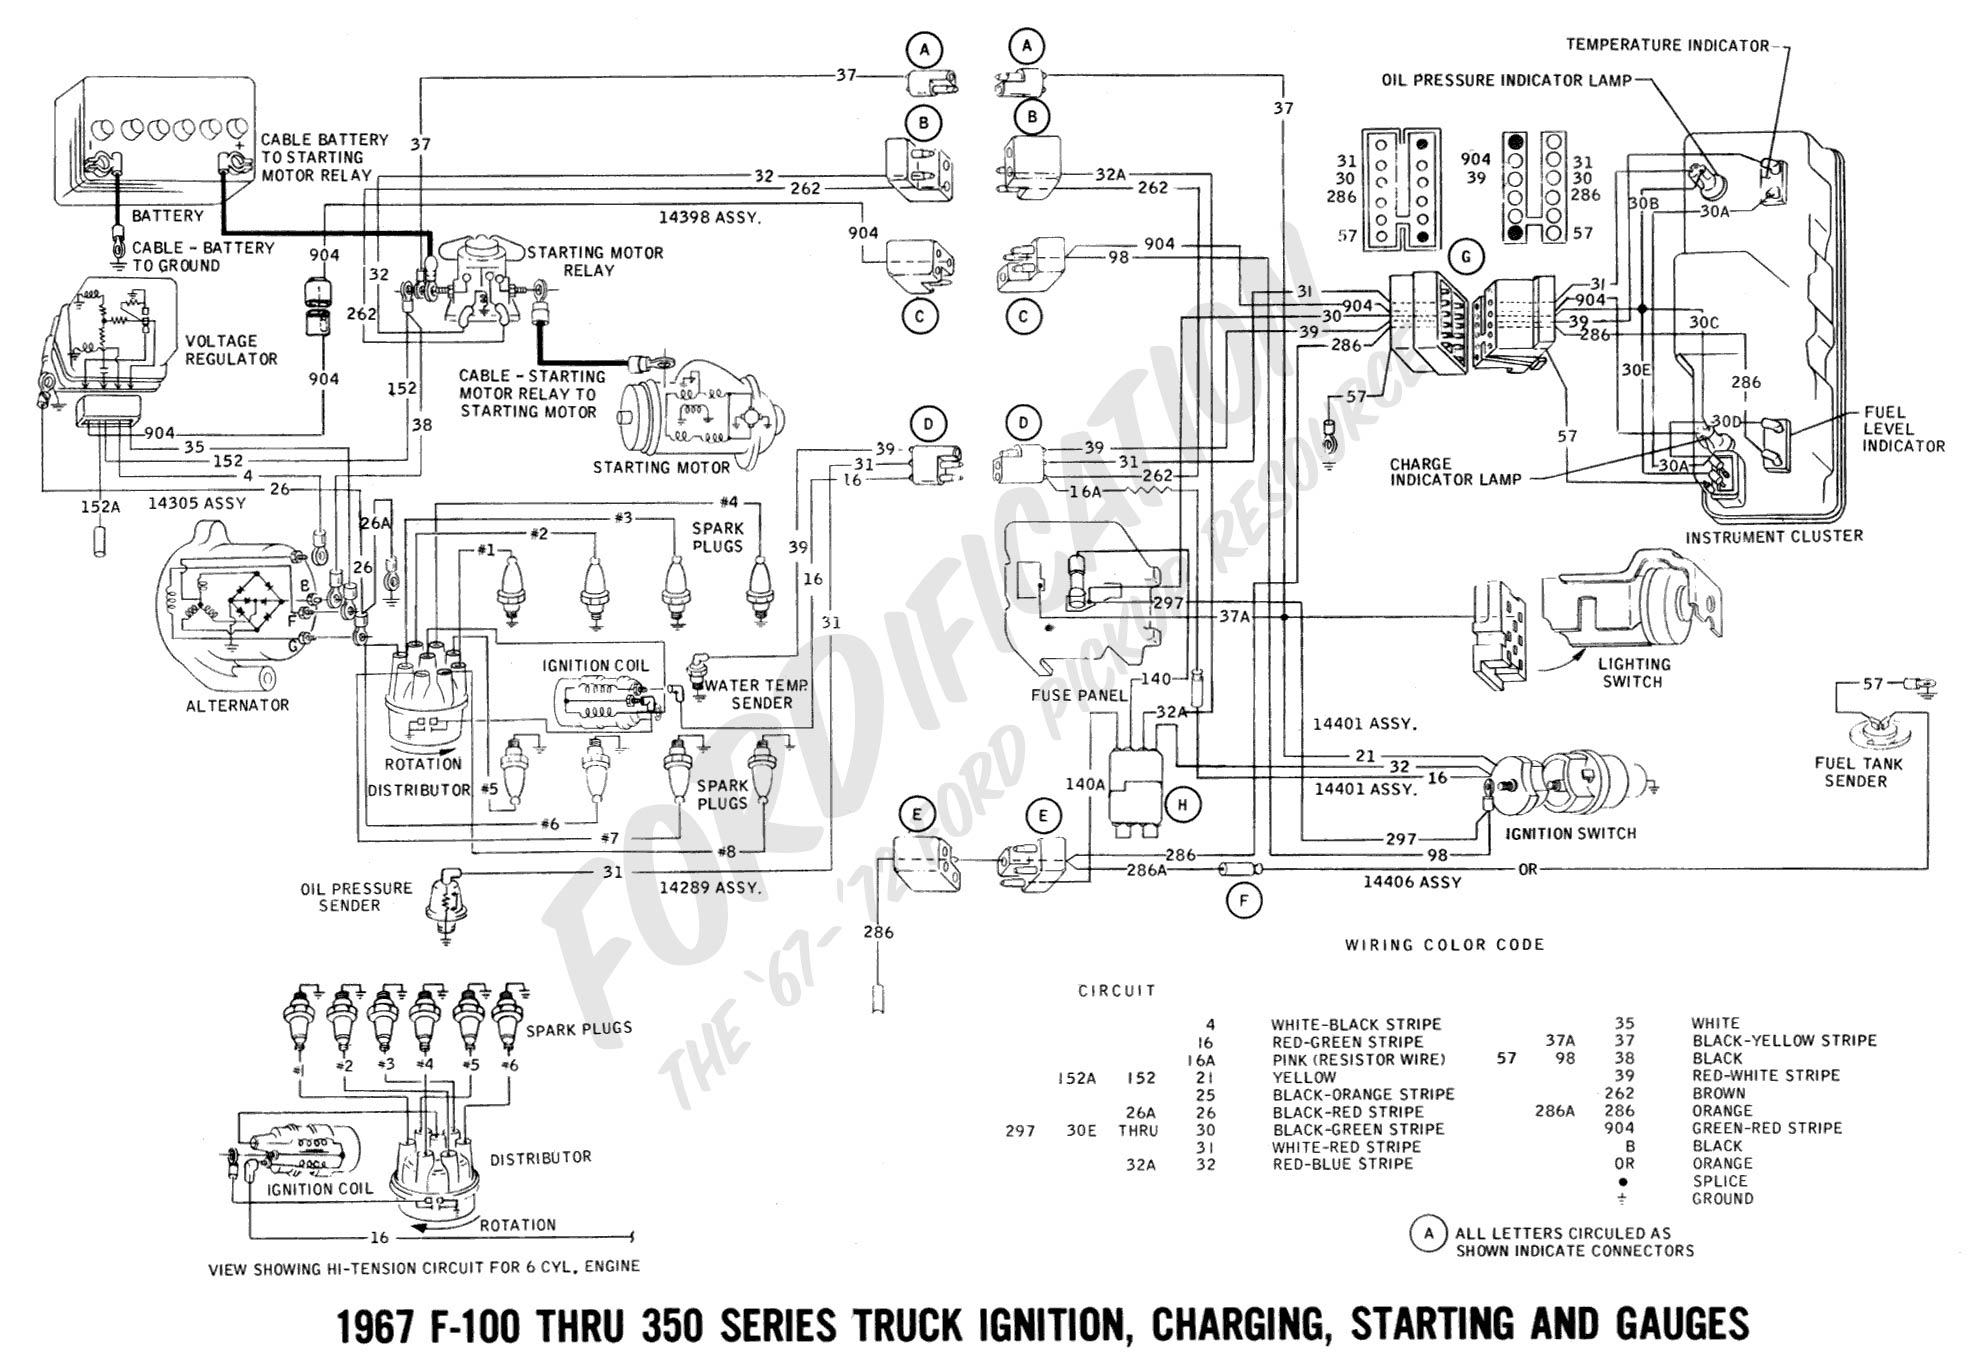 2005 Ford F150 Wiring Diagram Pdf from www.fordification.com